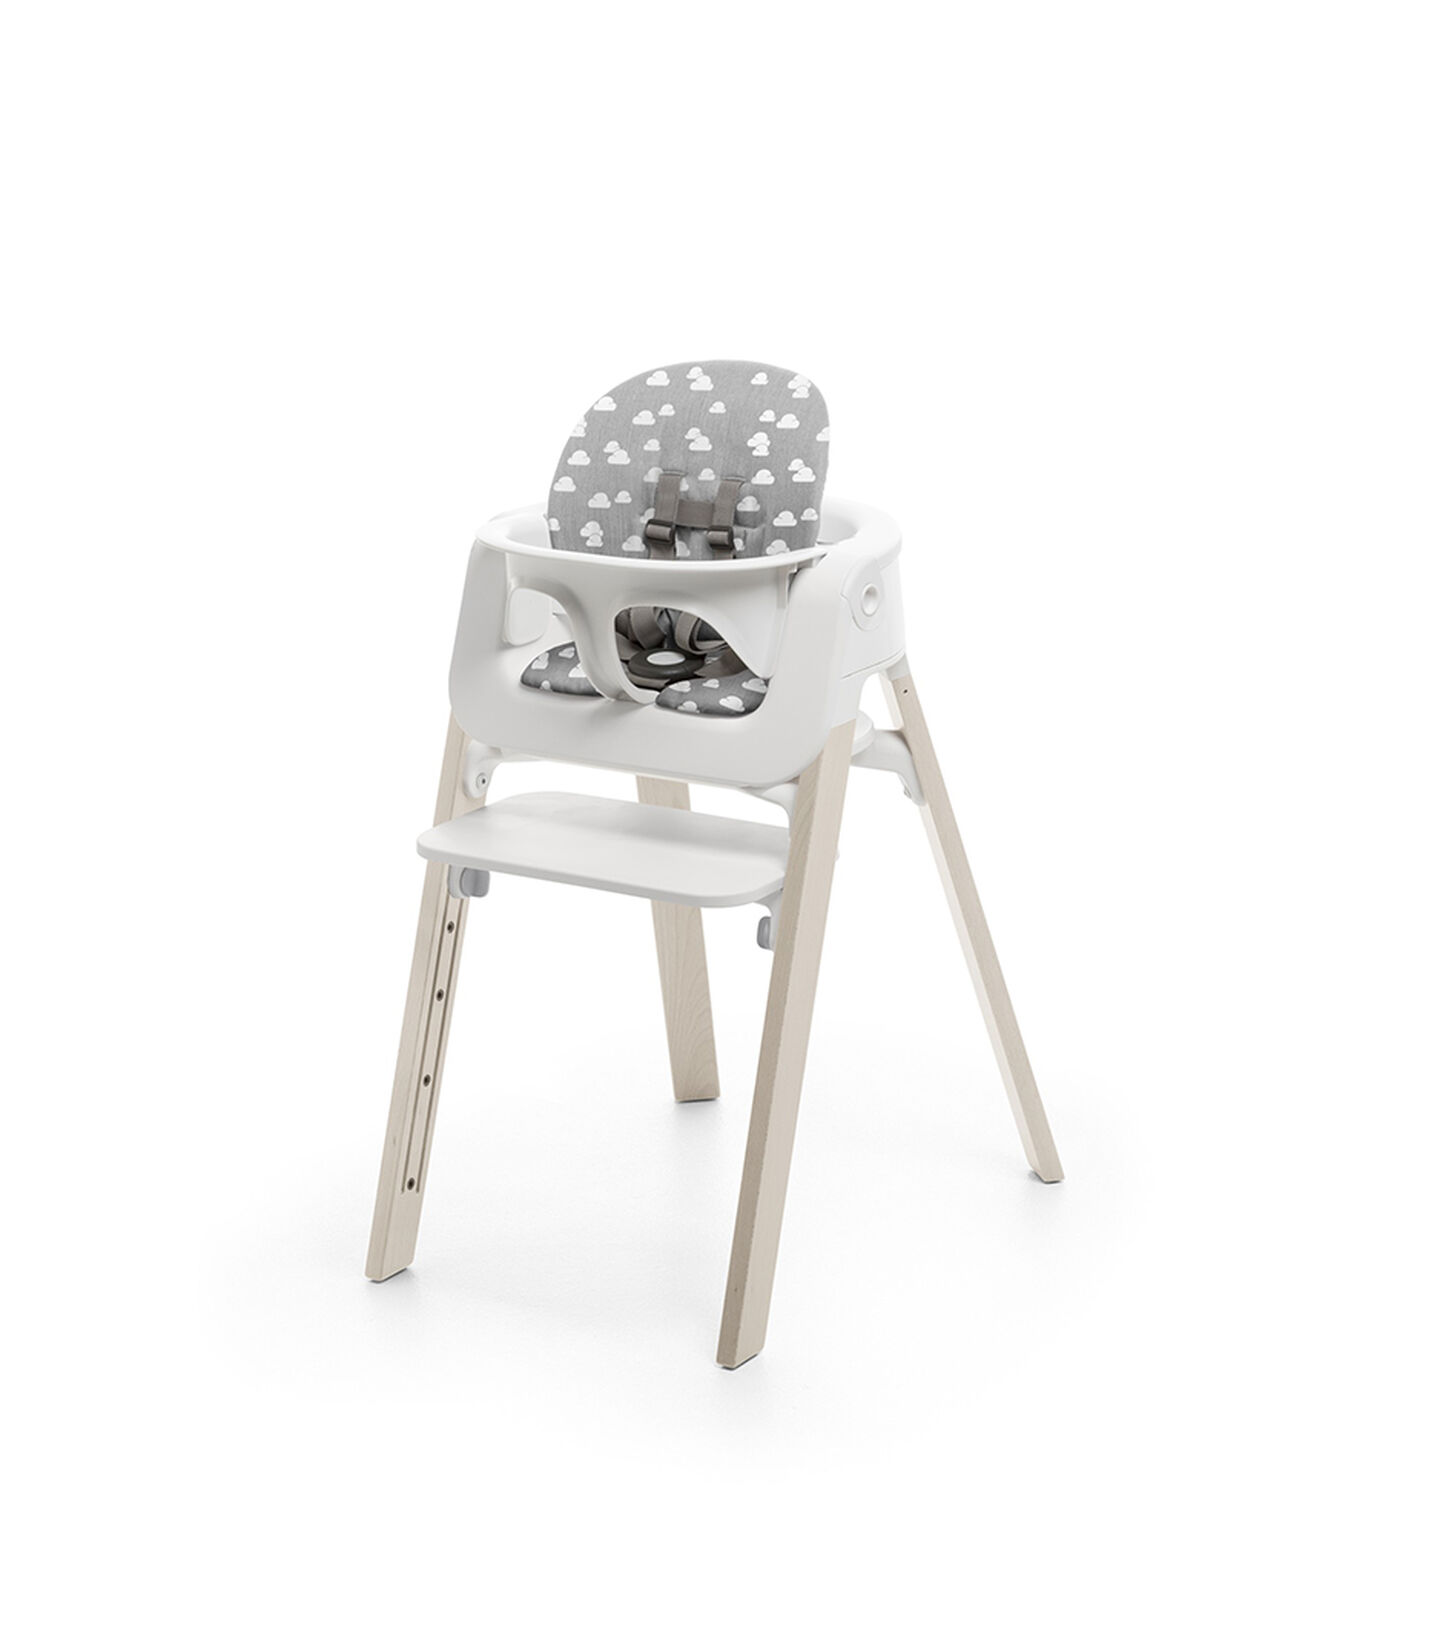 Stokke® Steps™ Baby Set Cushion Grey Clouds, Grey Clouds, mainview view 3